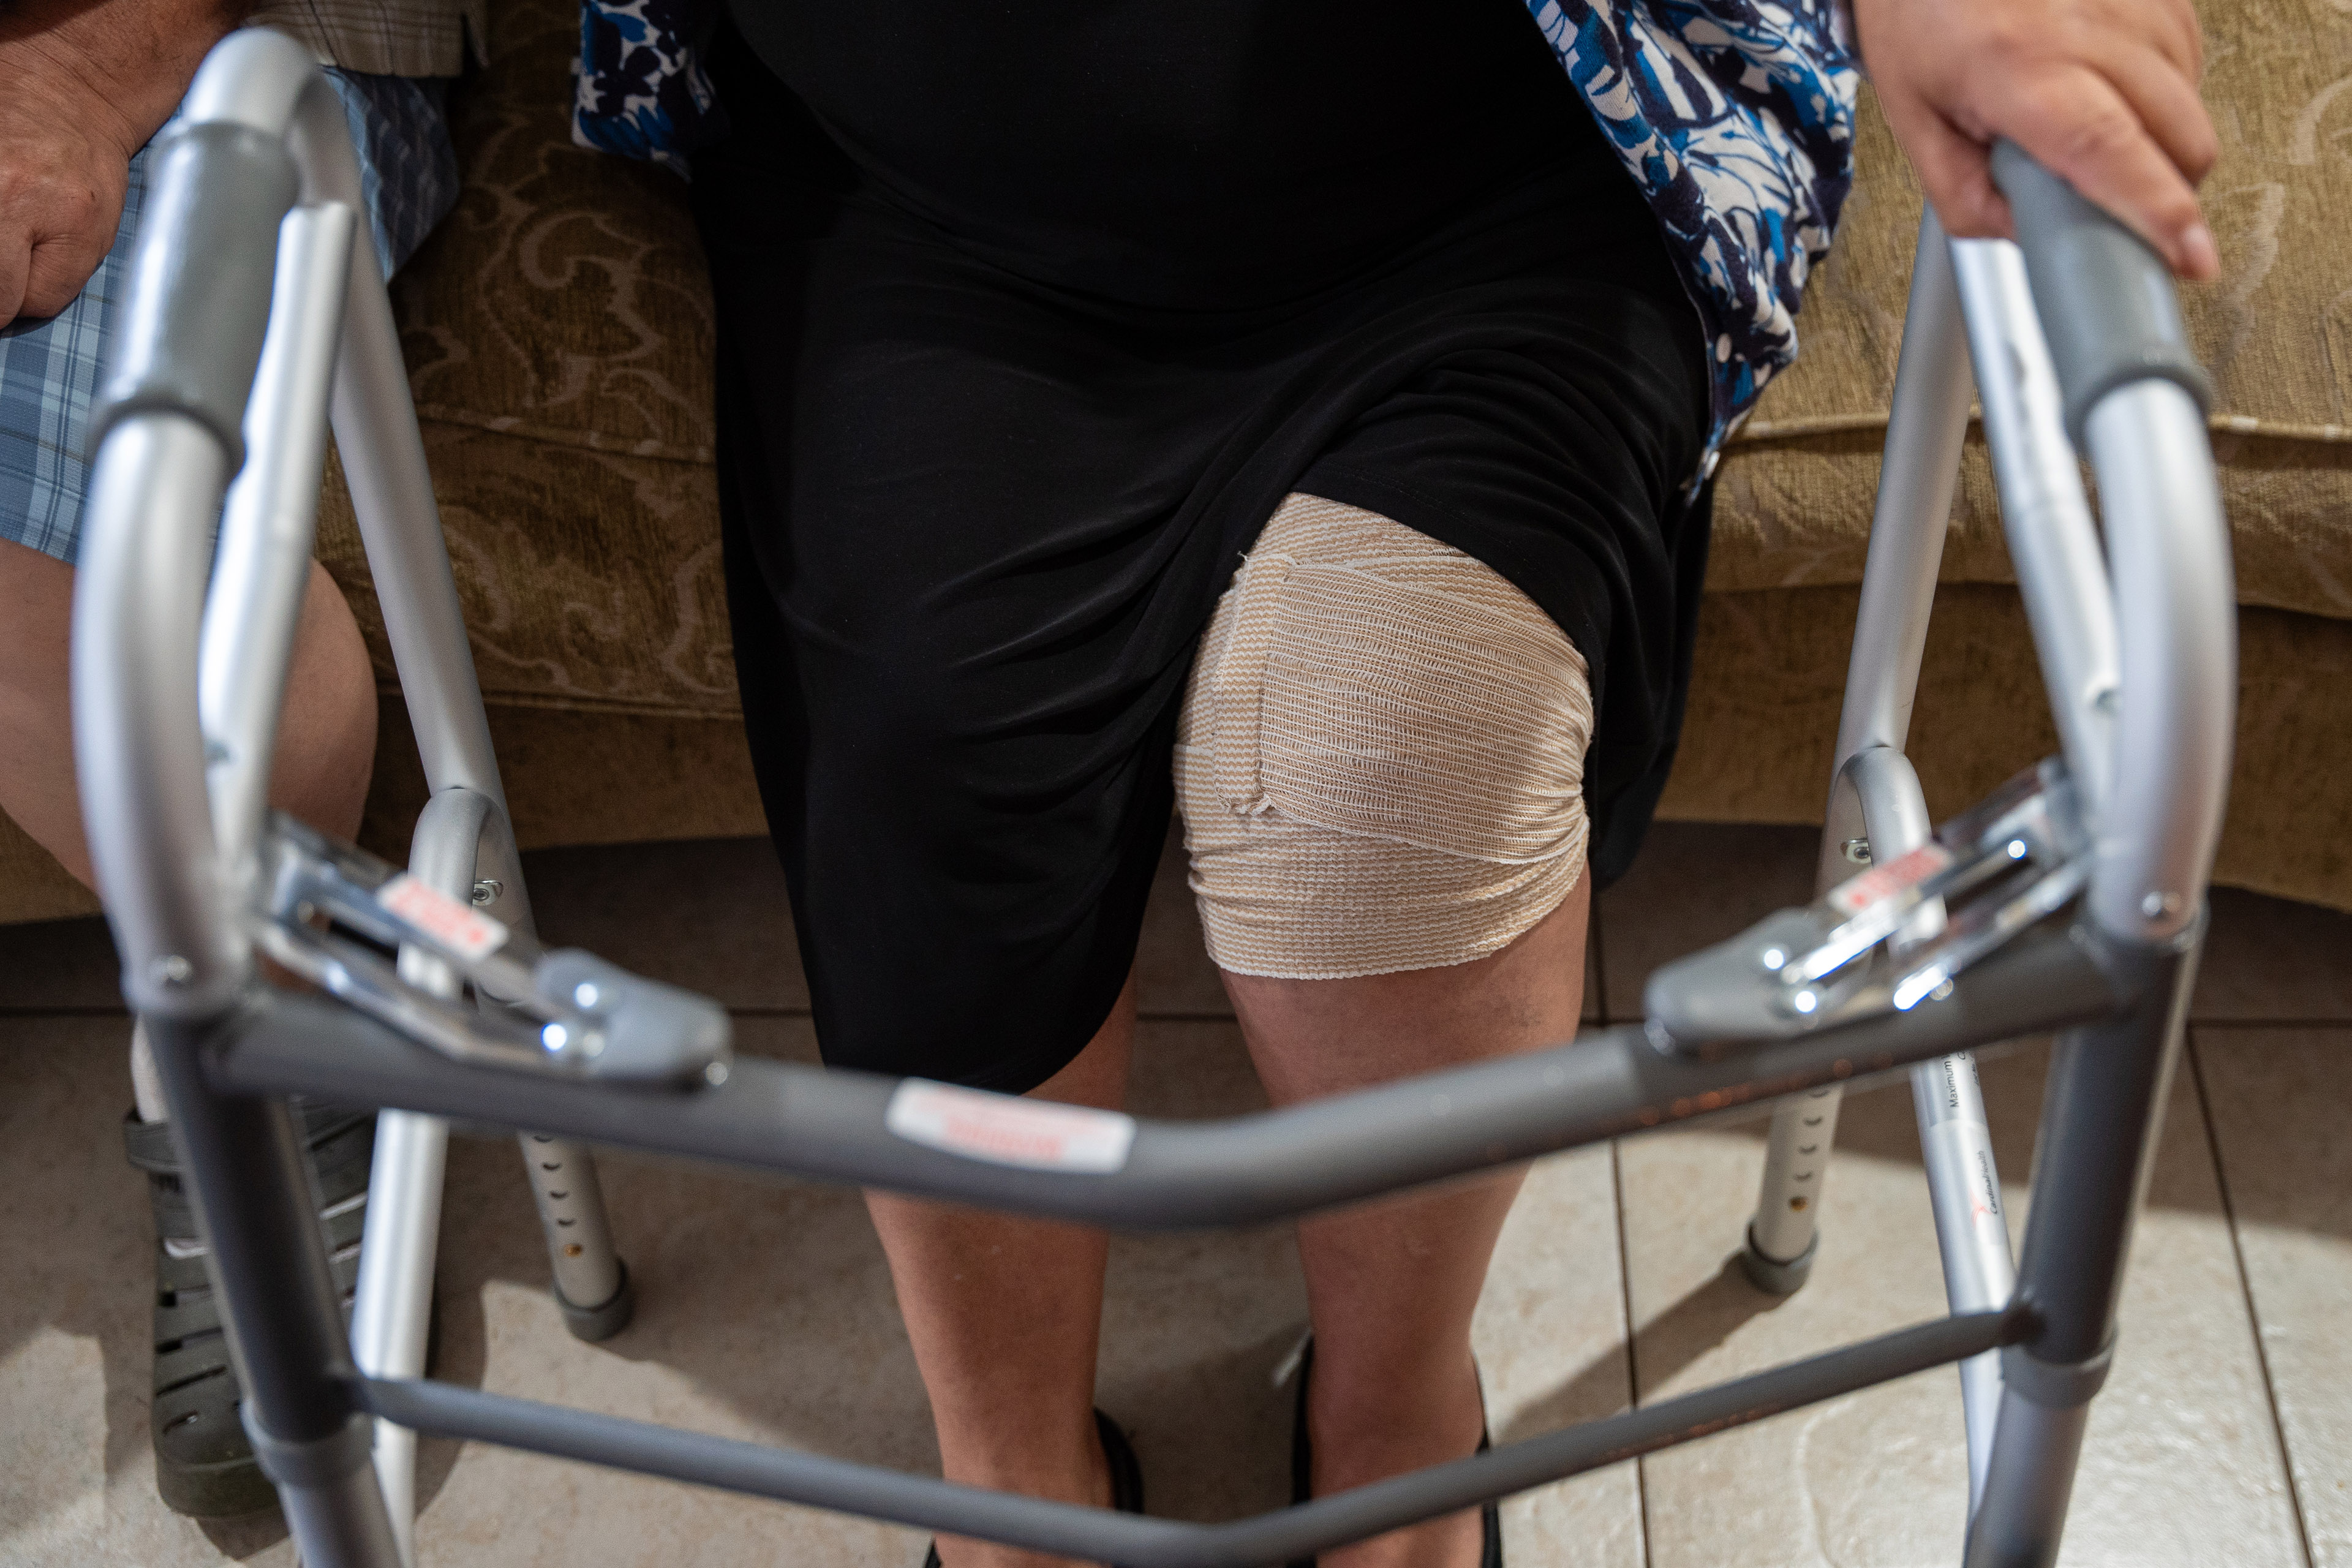 A woman sits on a couch, holding a walker, with a bandage wrapped around her left knee.